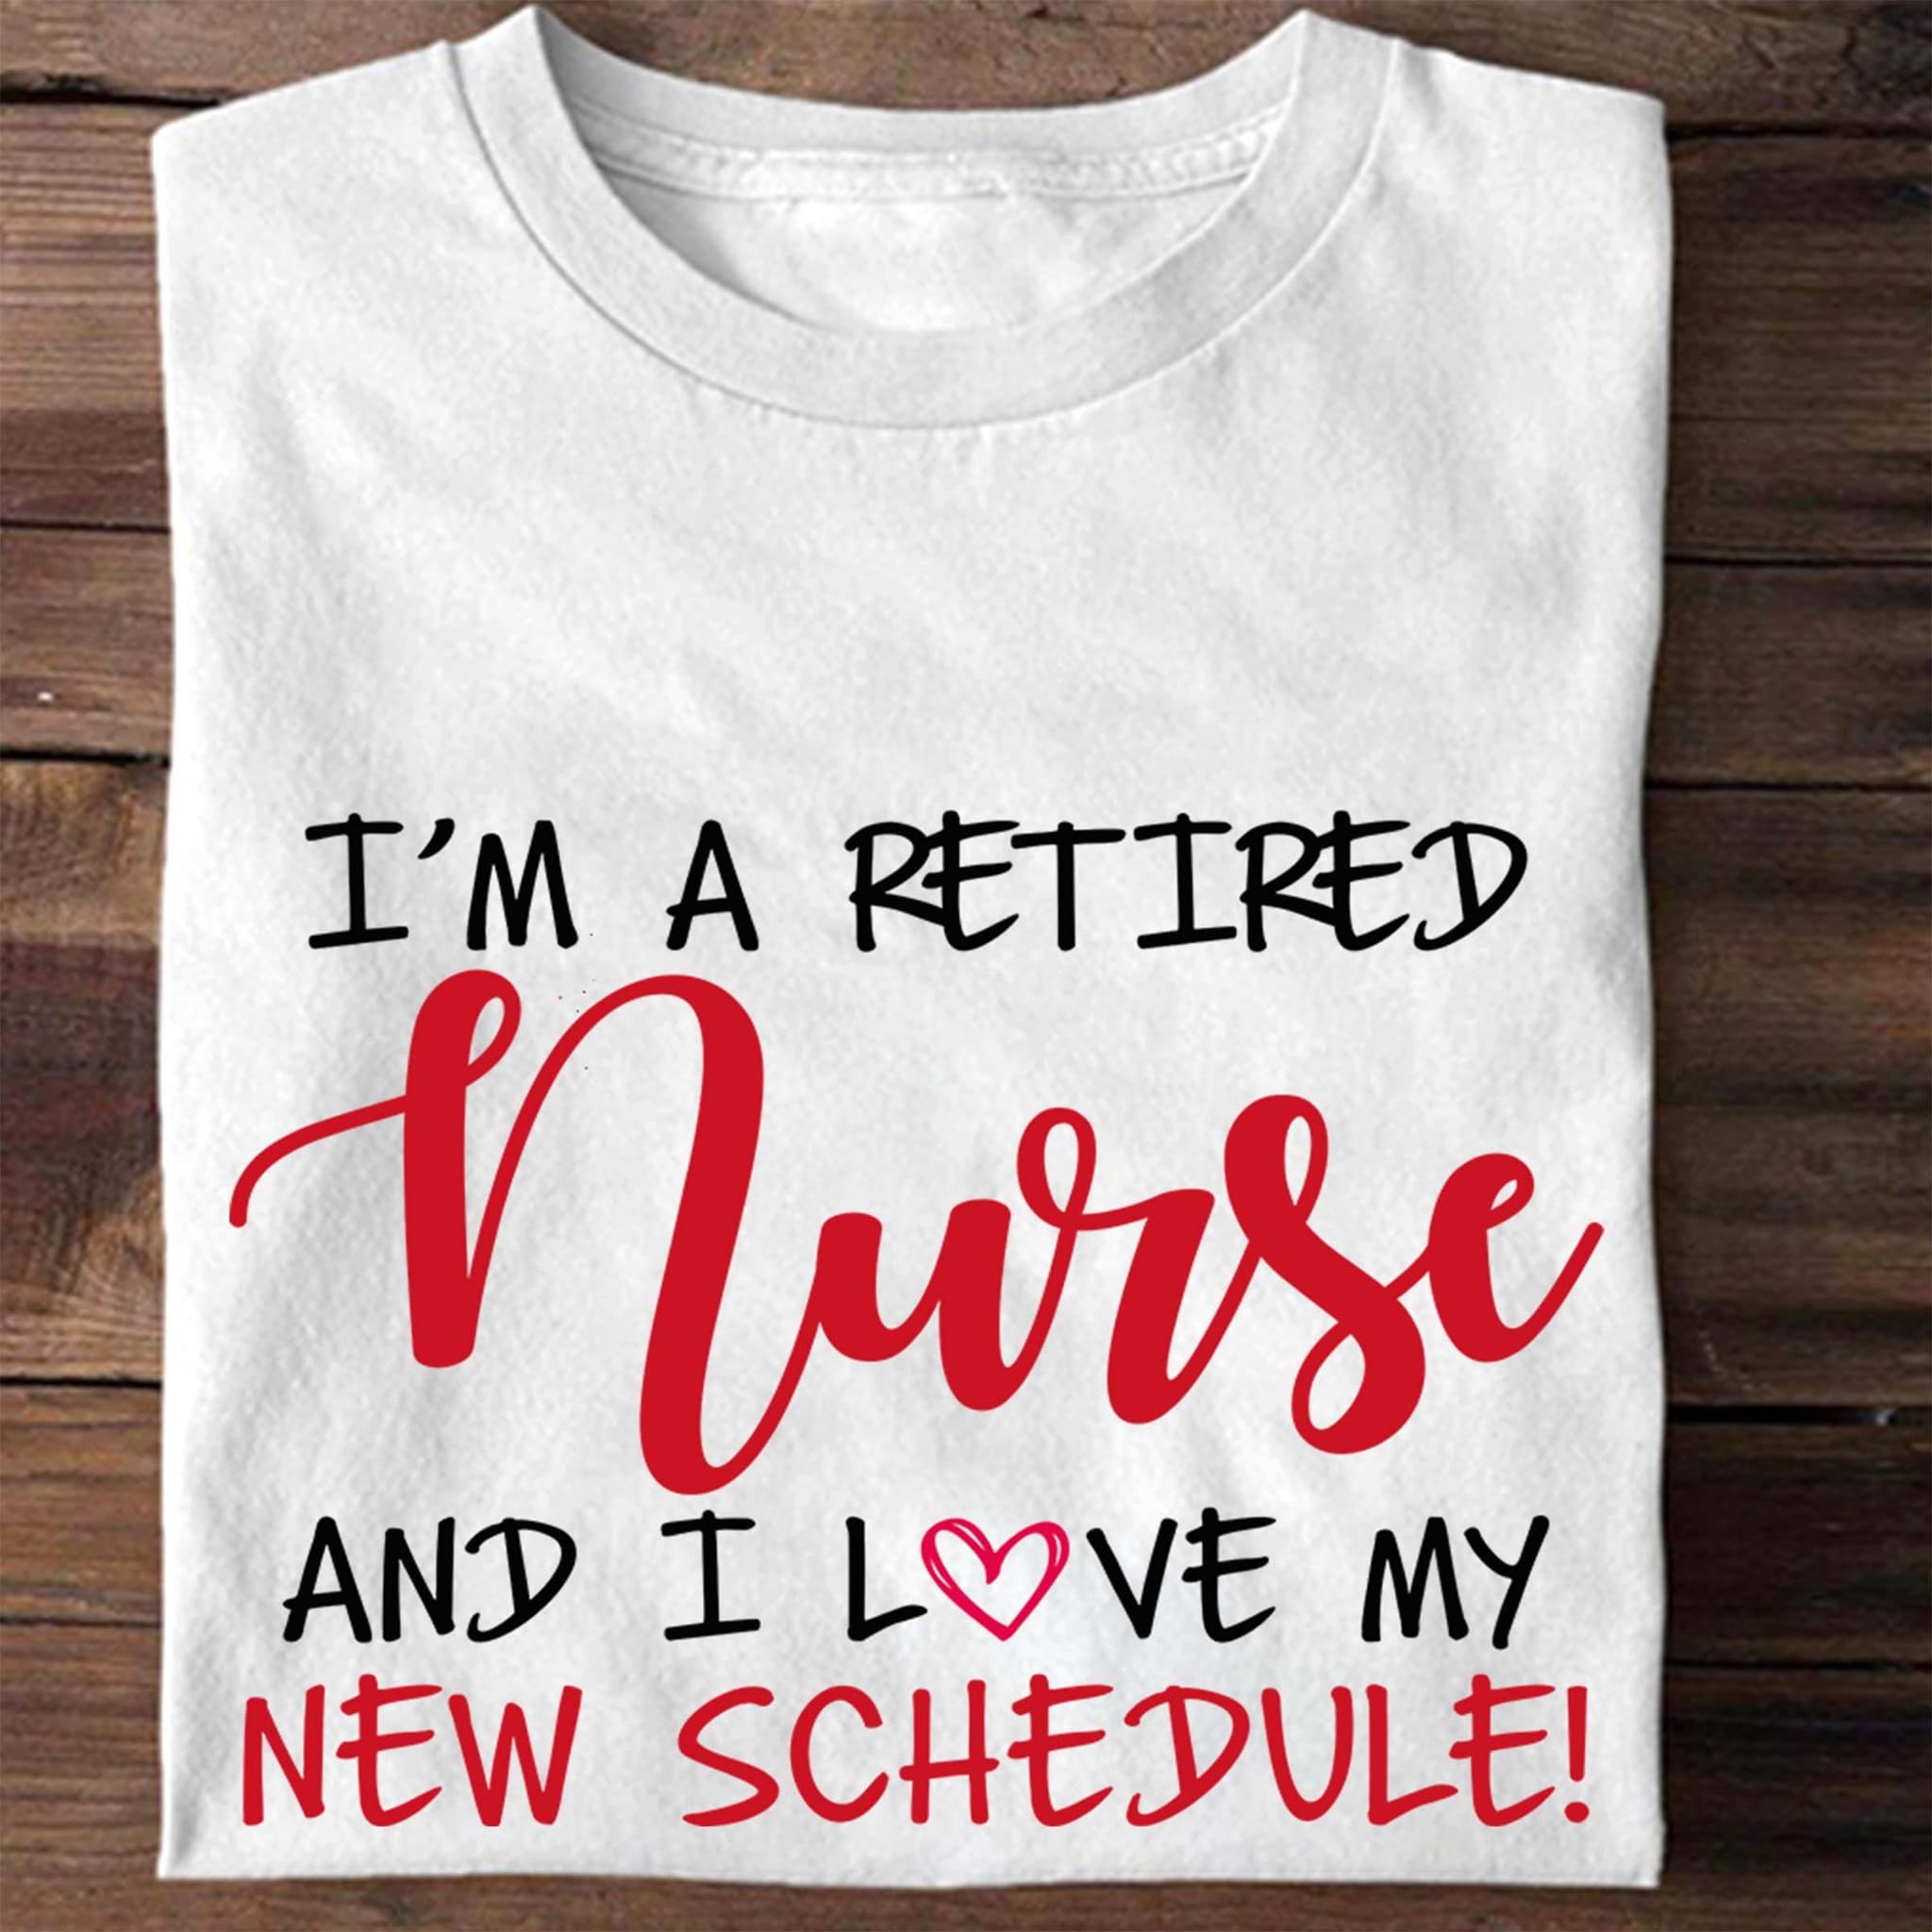 I'm a retired nurse and I love my new schedule - Gift for retired nurse, love being nurse